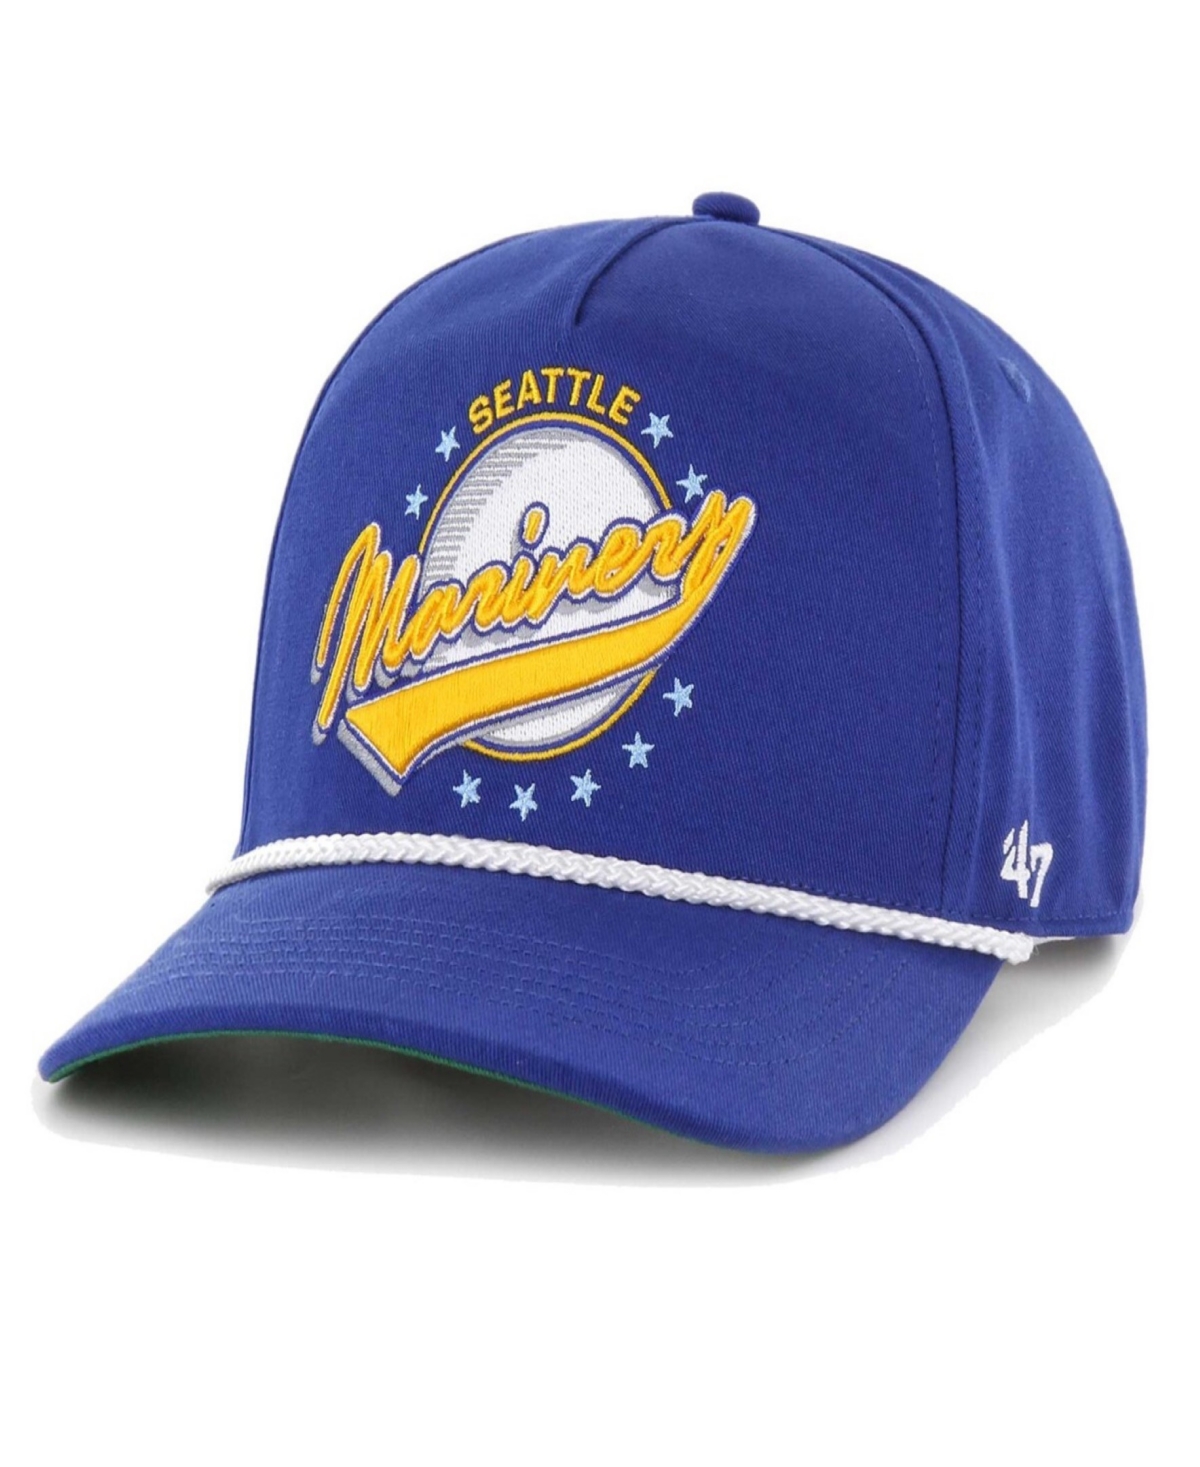 47 Brand Men's Royal Seattle Mariners Wax Pack Collection Premier Hitch Adjustable Hat - Royal